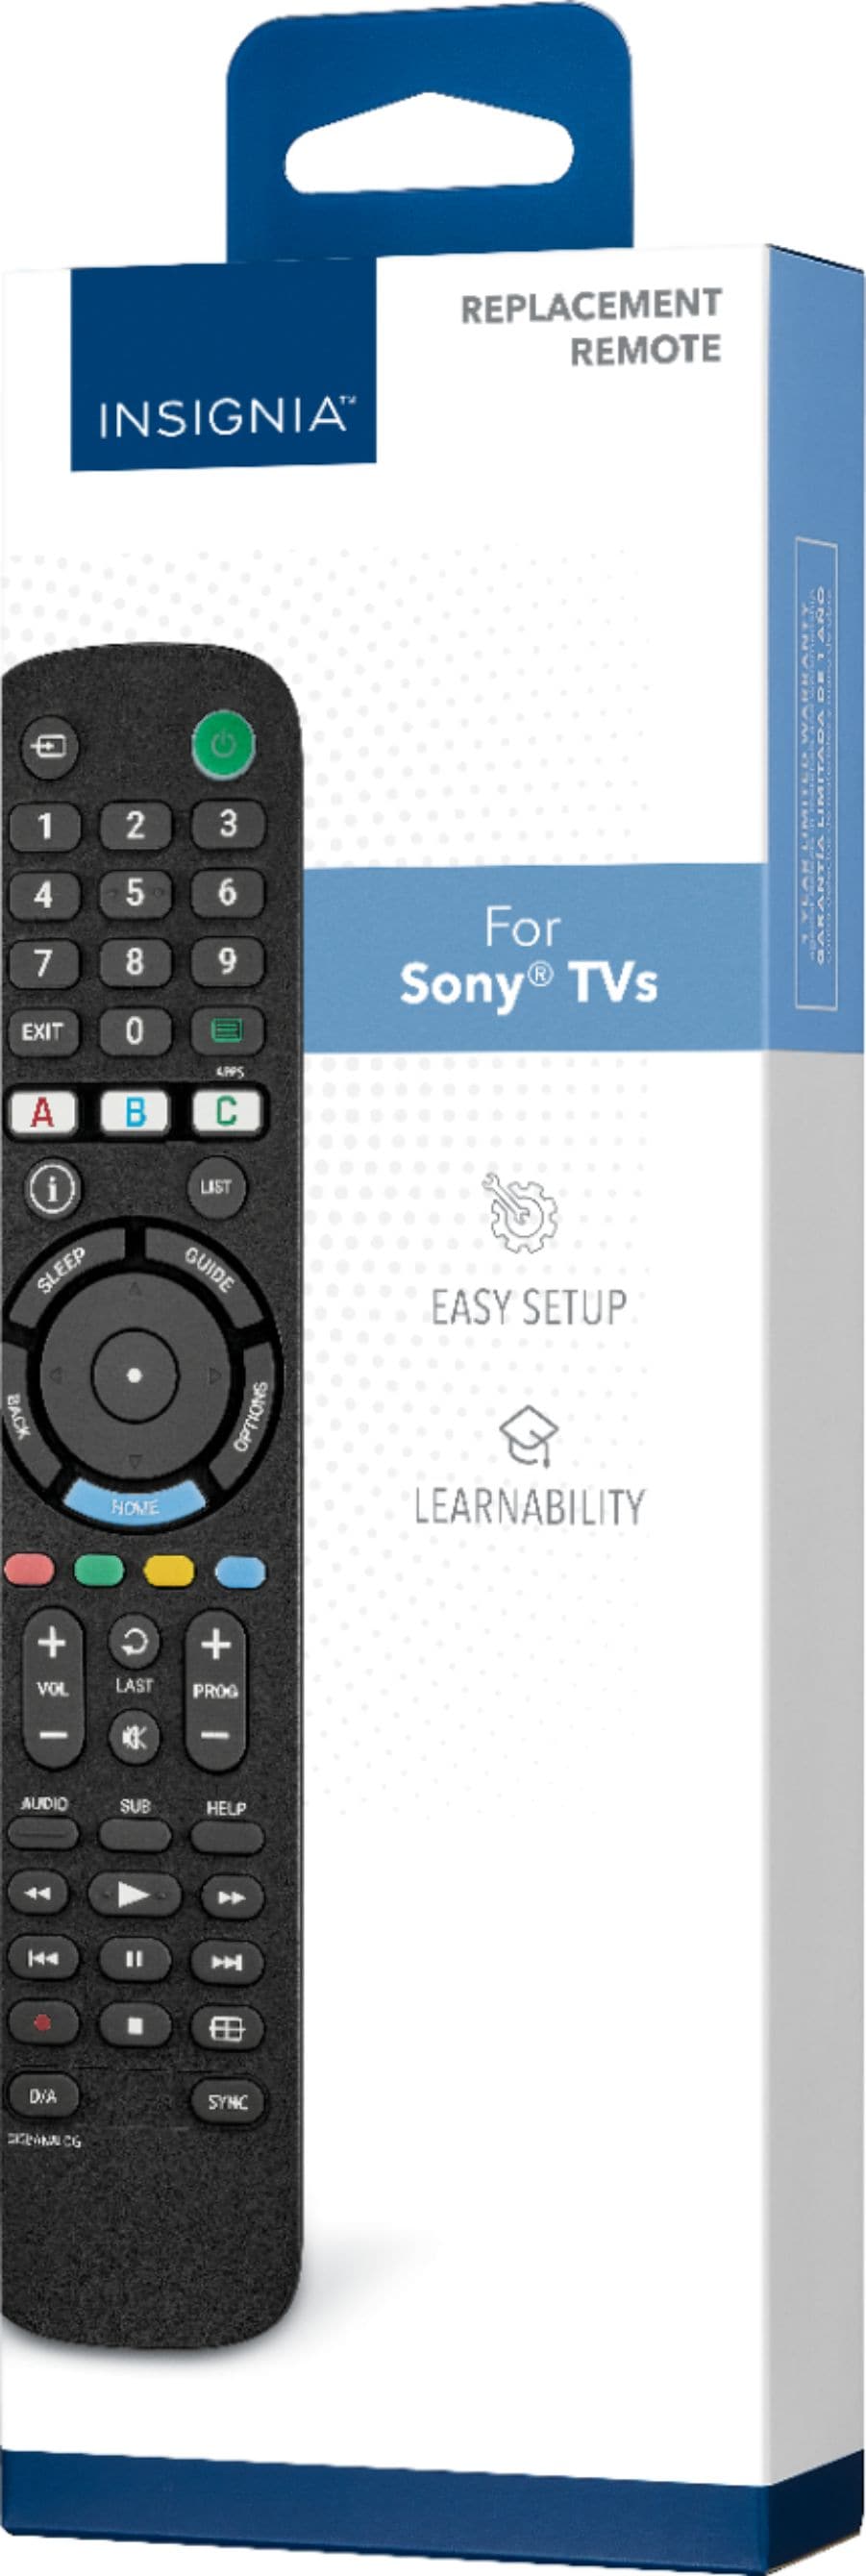 Insignia™ - Replacement Remote for Sony TVs - Black_1